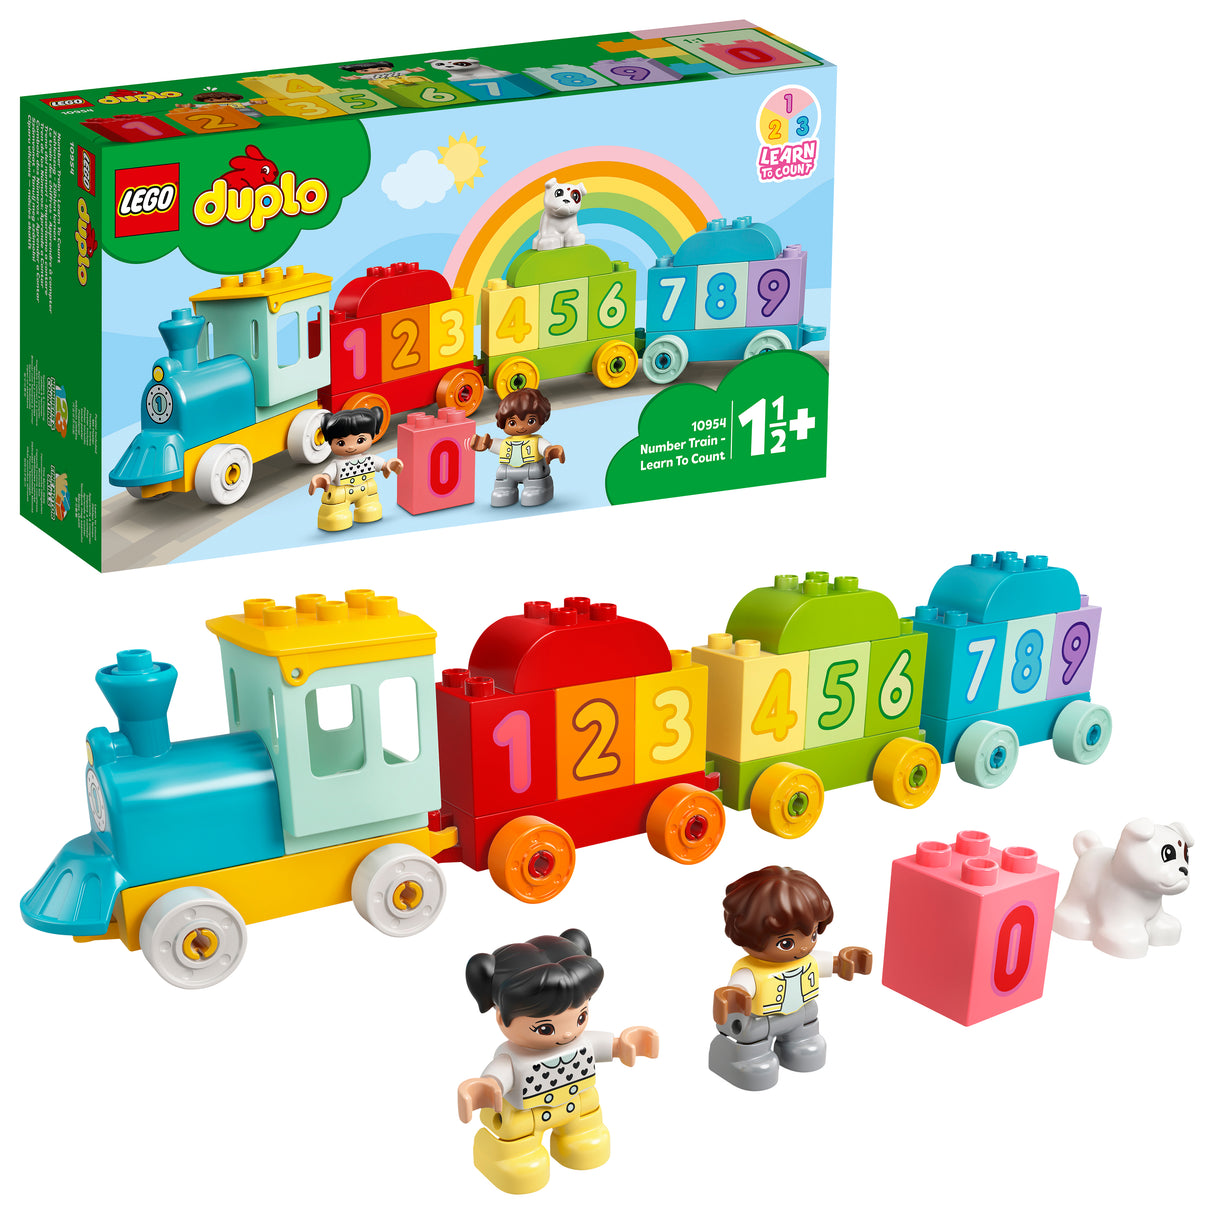 LEGO DUPLO NUMBER TRAIN - LEARN TO COUNT 10954 AGE: 1 1/2+